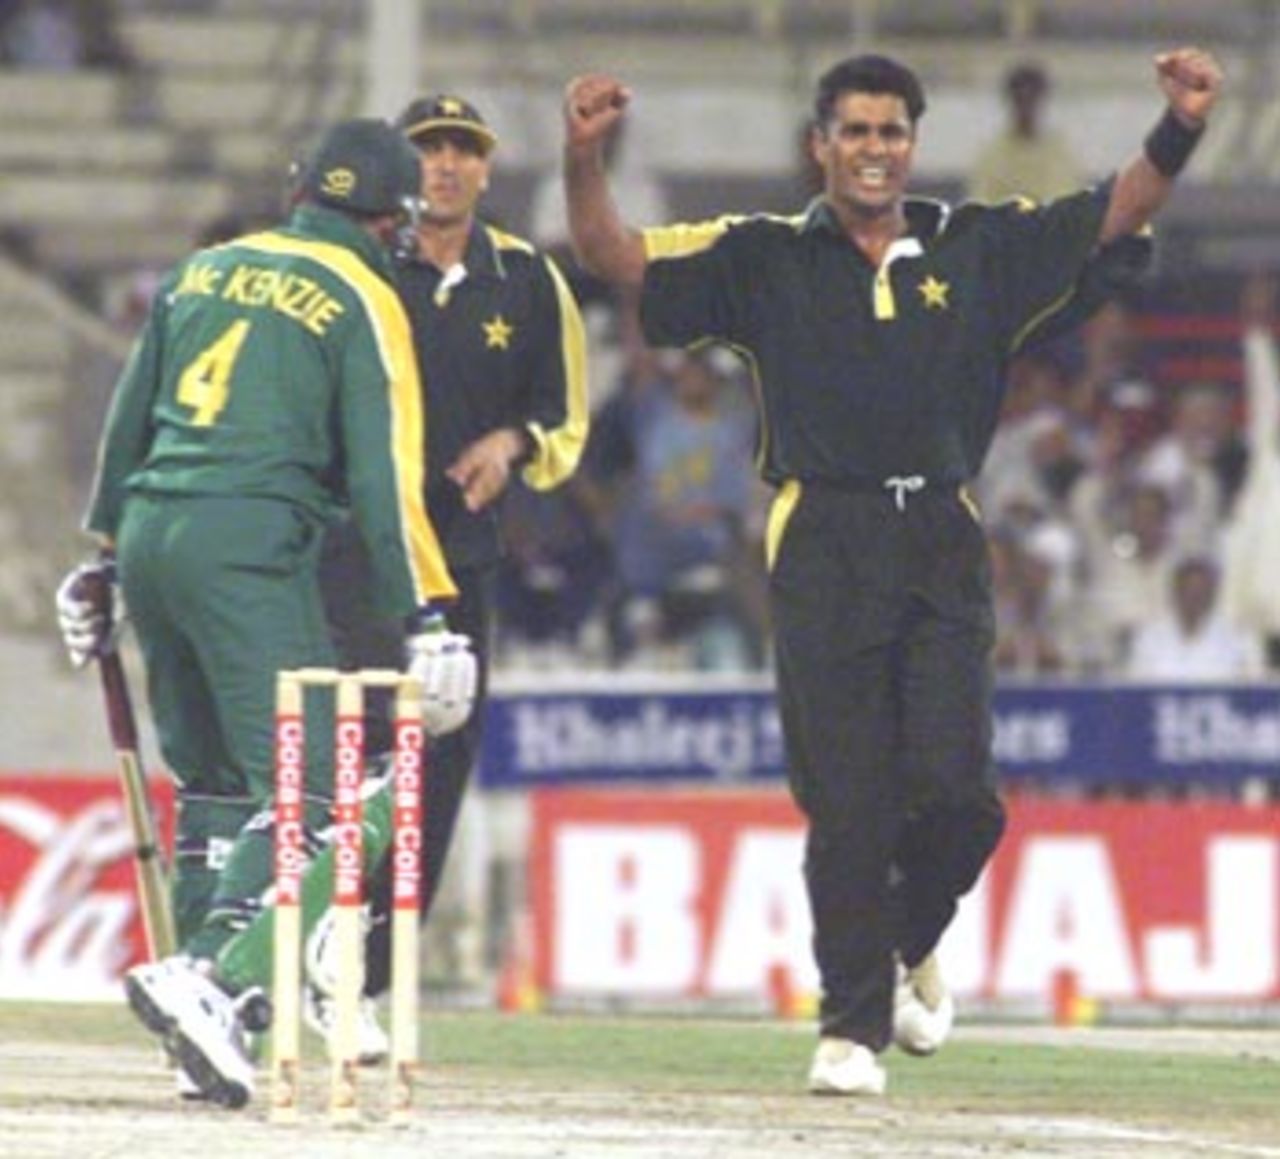 Waqar Younis celebrates after trapping McKenzie leg before wicket, Pakistan v South Africa, Coca-Cola Cup 1999/00, Sharjah C.A. Stadium, 28 March 2000.